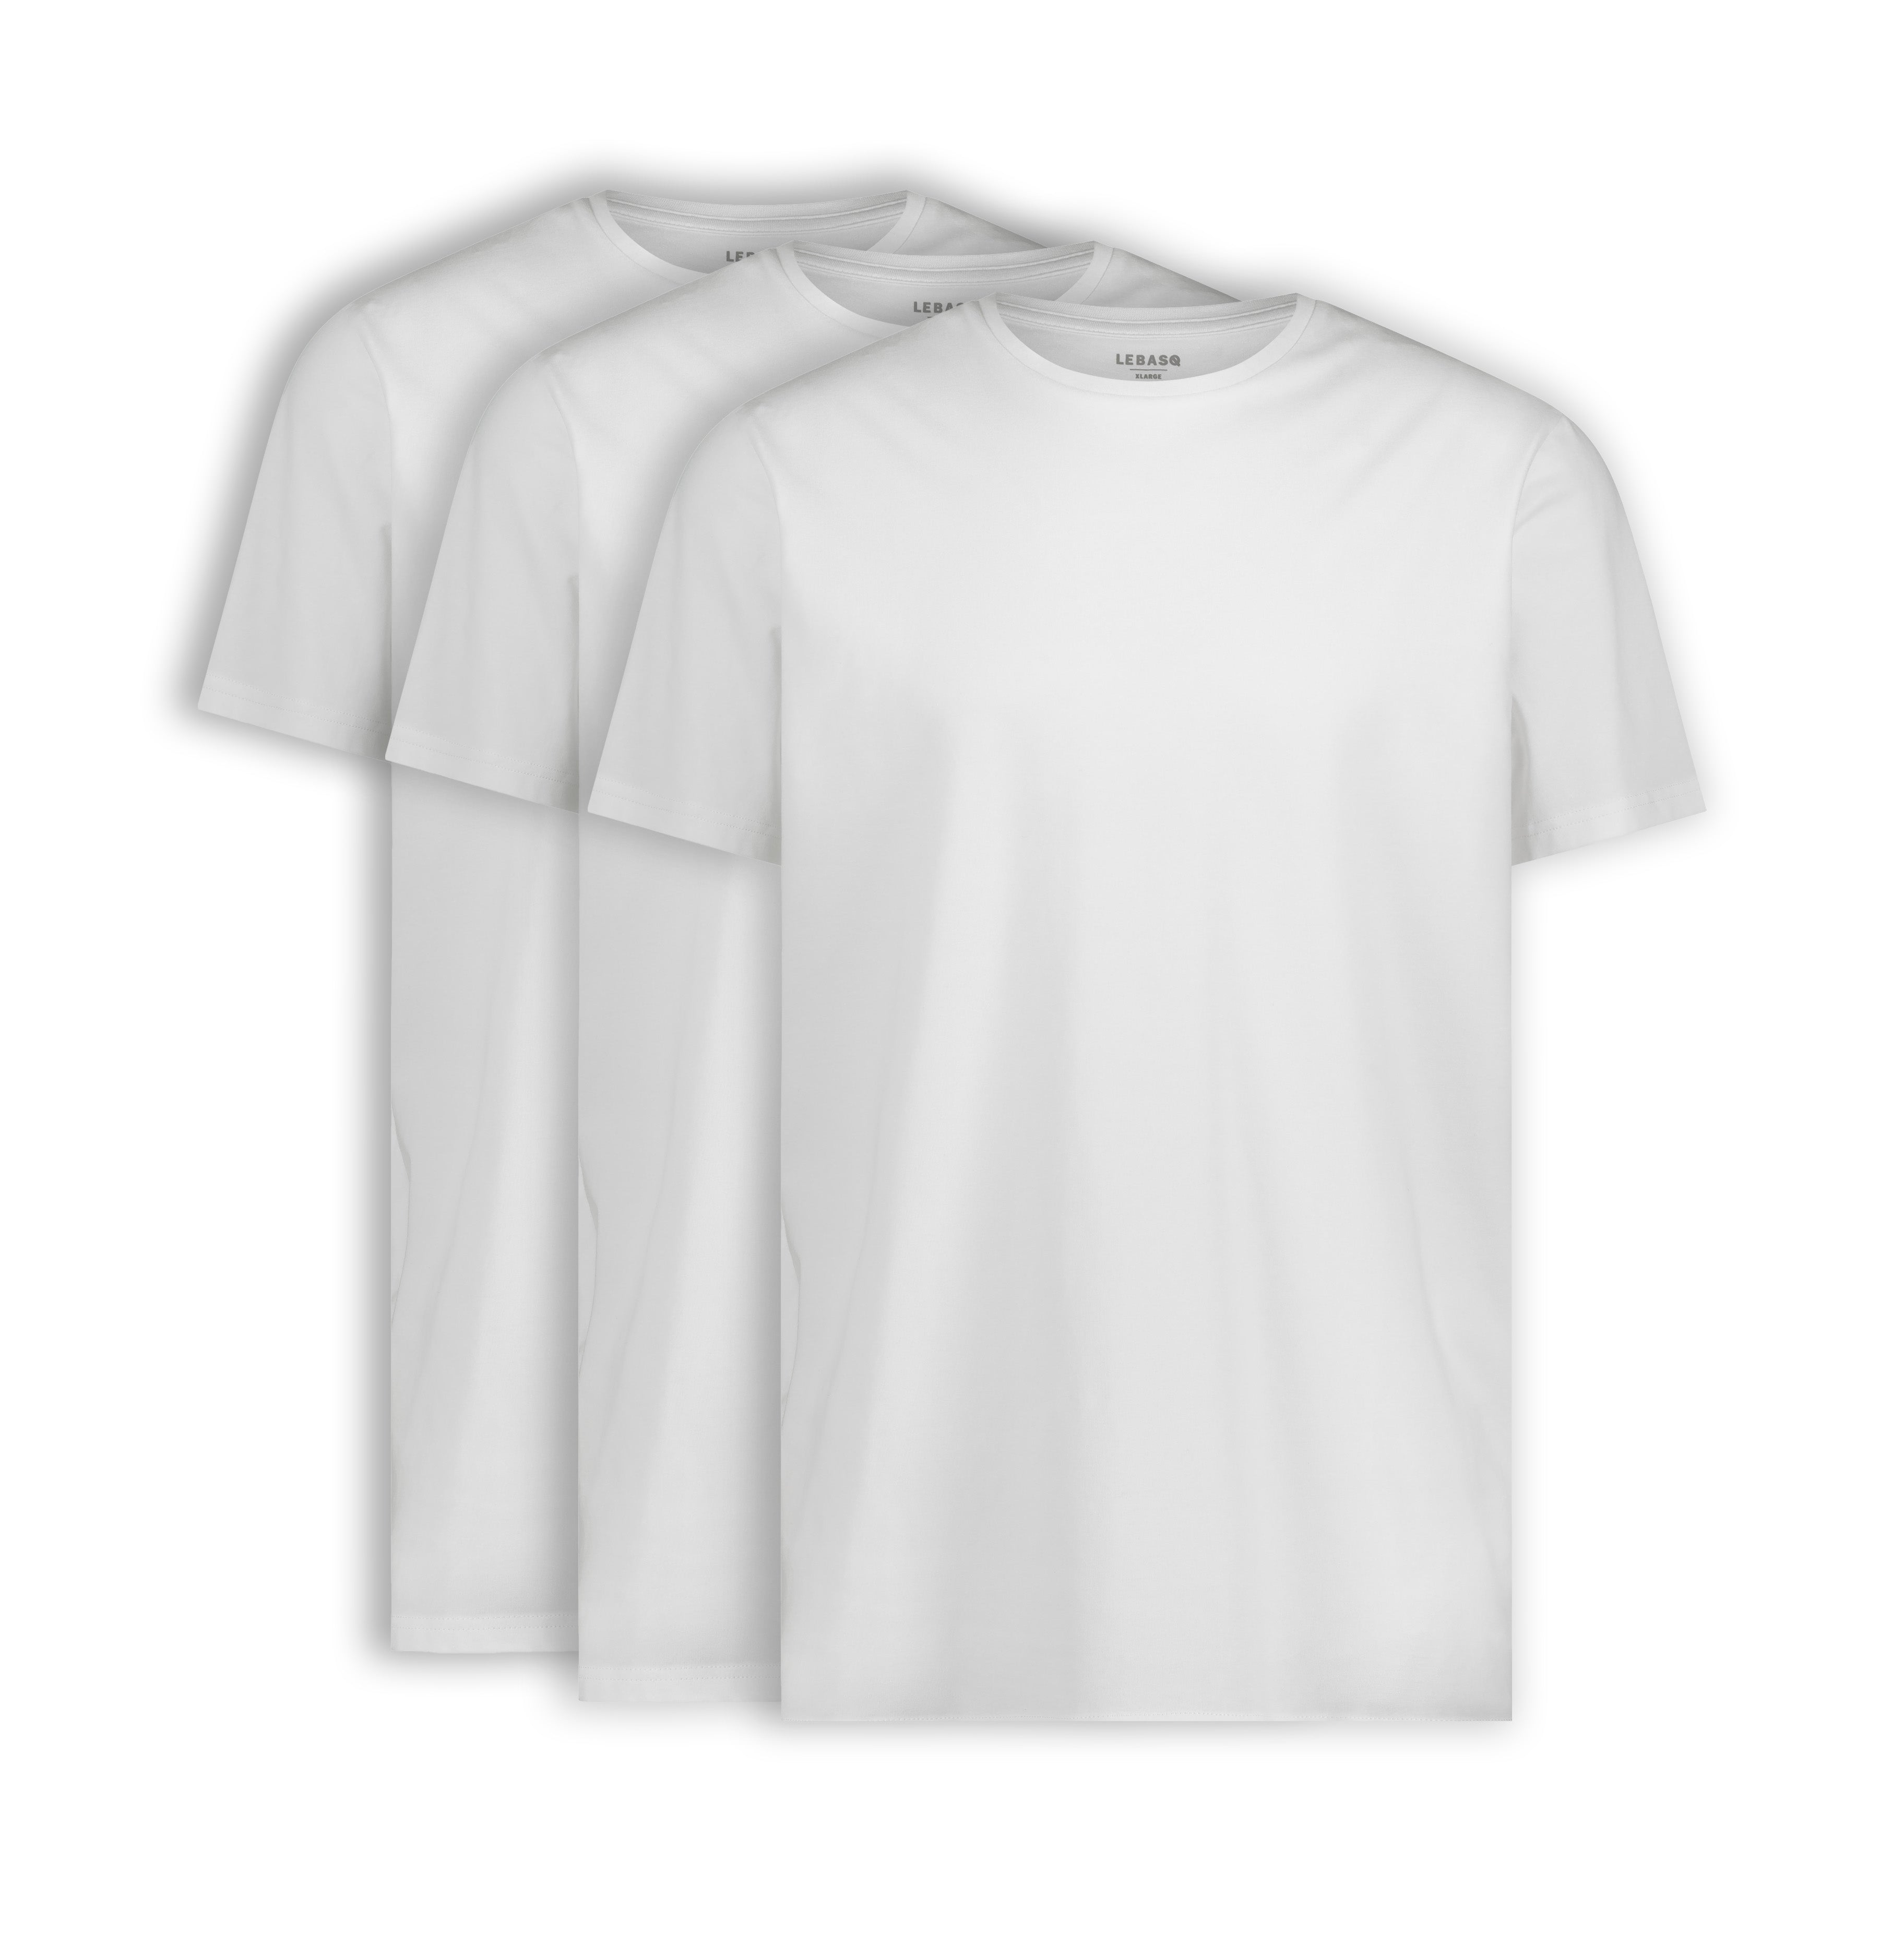 Miles's Crew White 3 Pack - Long Fit